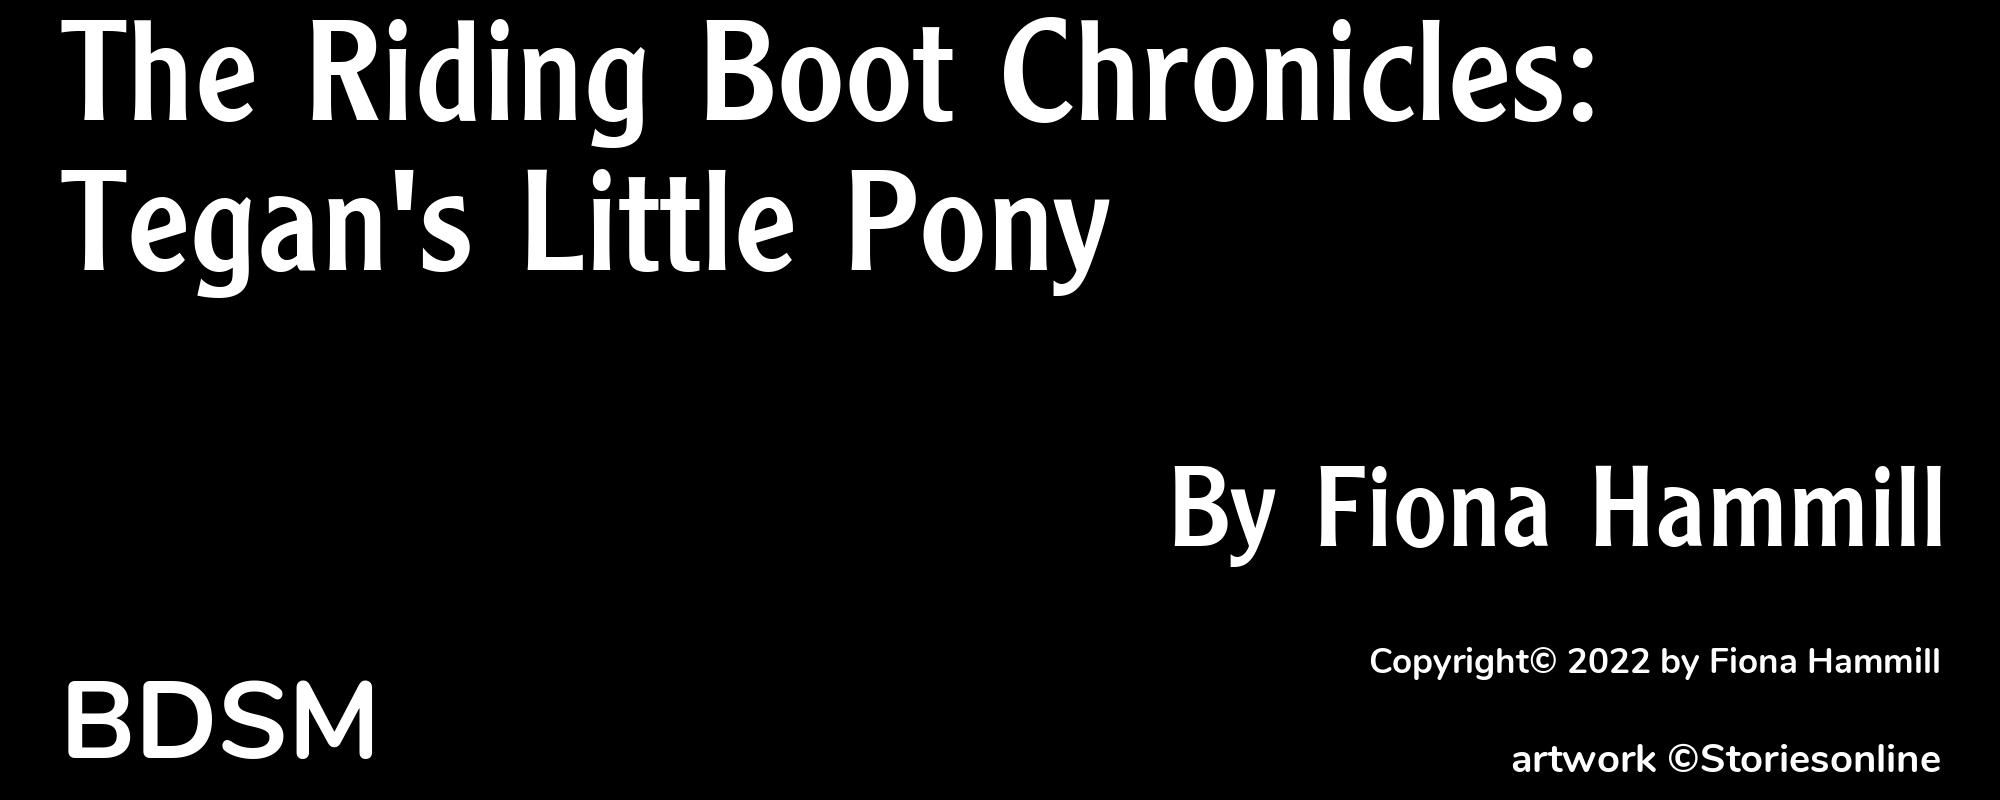 The Riding Boot Chronicles: Tegan's Little Pony - Cover